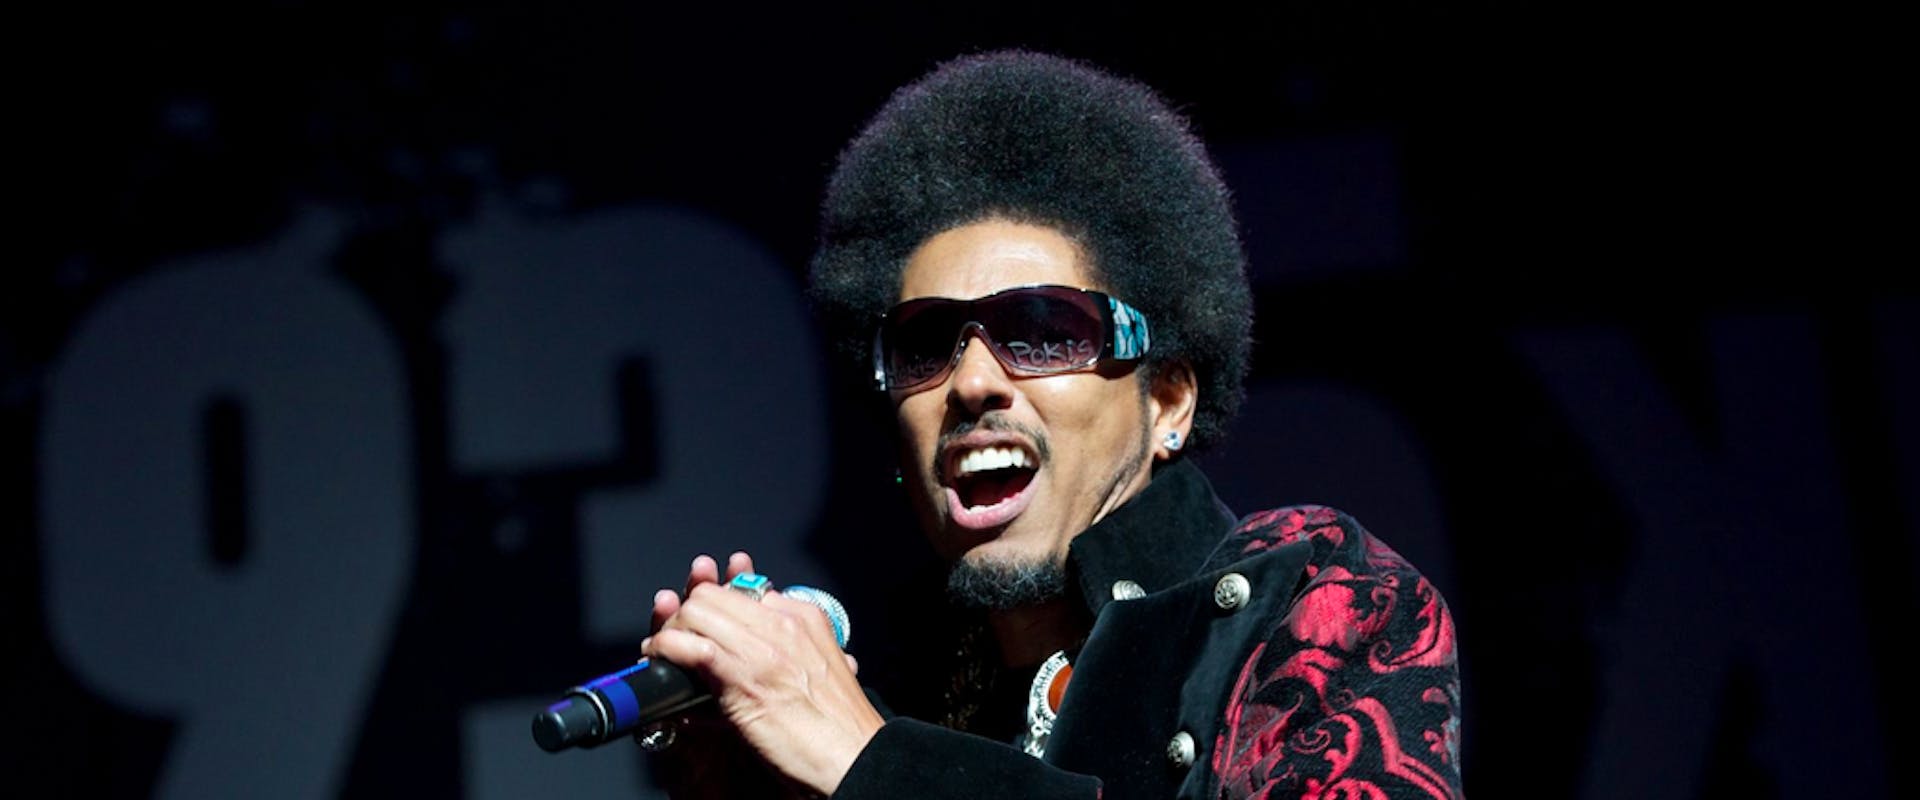 LOS ANGELES, CA - APRIL 29: Lead singer Shock G of the alternative rap group Digital Underground from Oakland California performs at Krush Groove 2011 sponsored by radio station 93.5 KDAY At The Gibson Amphitheatre on April 29, 2011 in Los Angeles, California. 